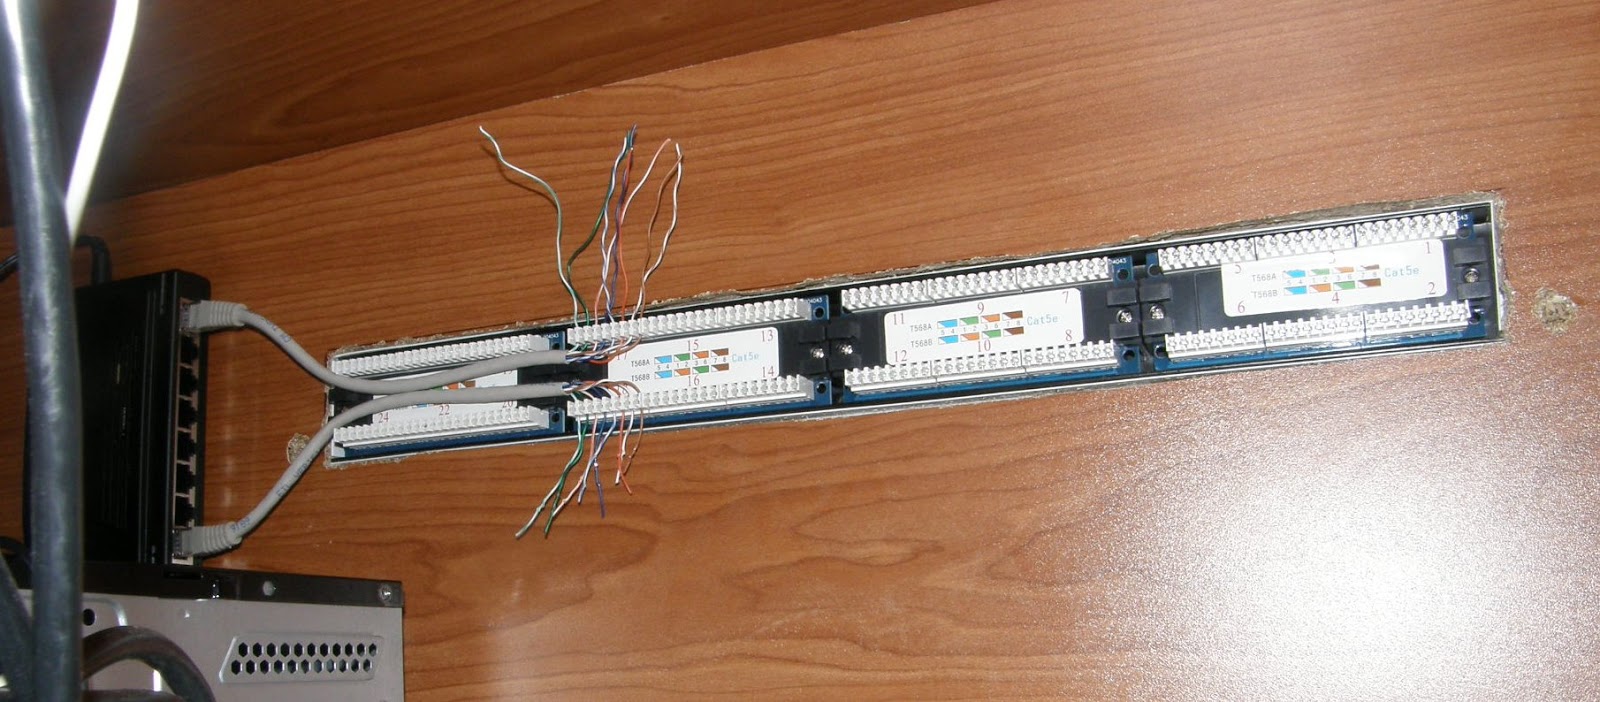 In Case You Need To Know: Wiring up a Home Network Patch Panel